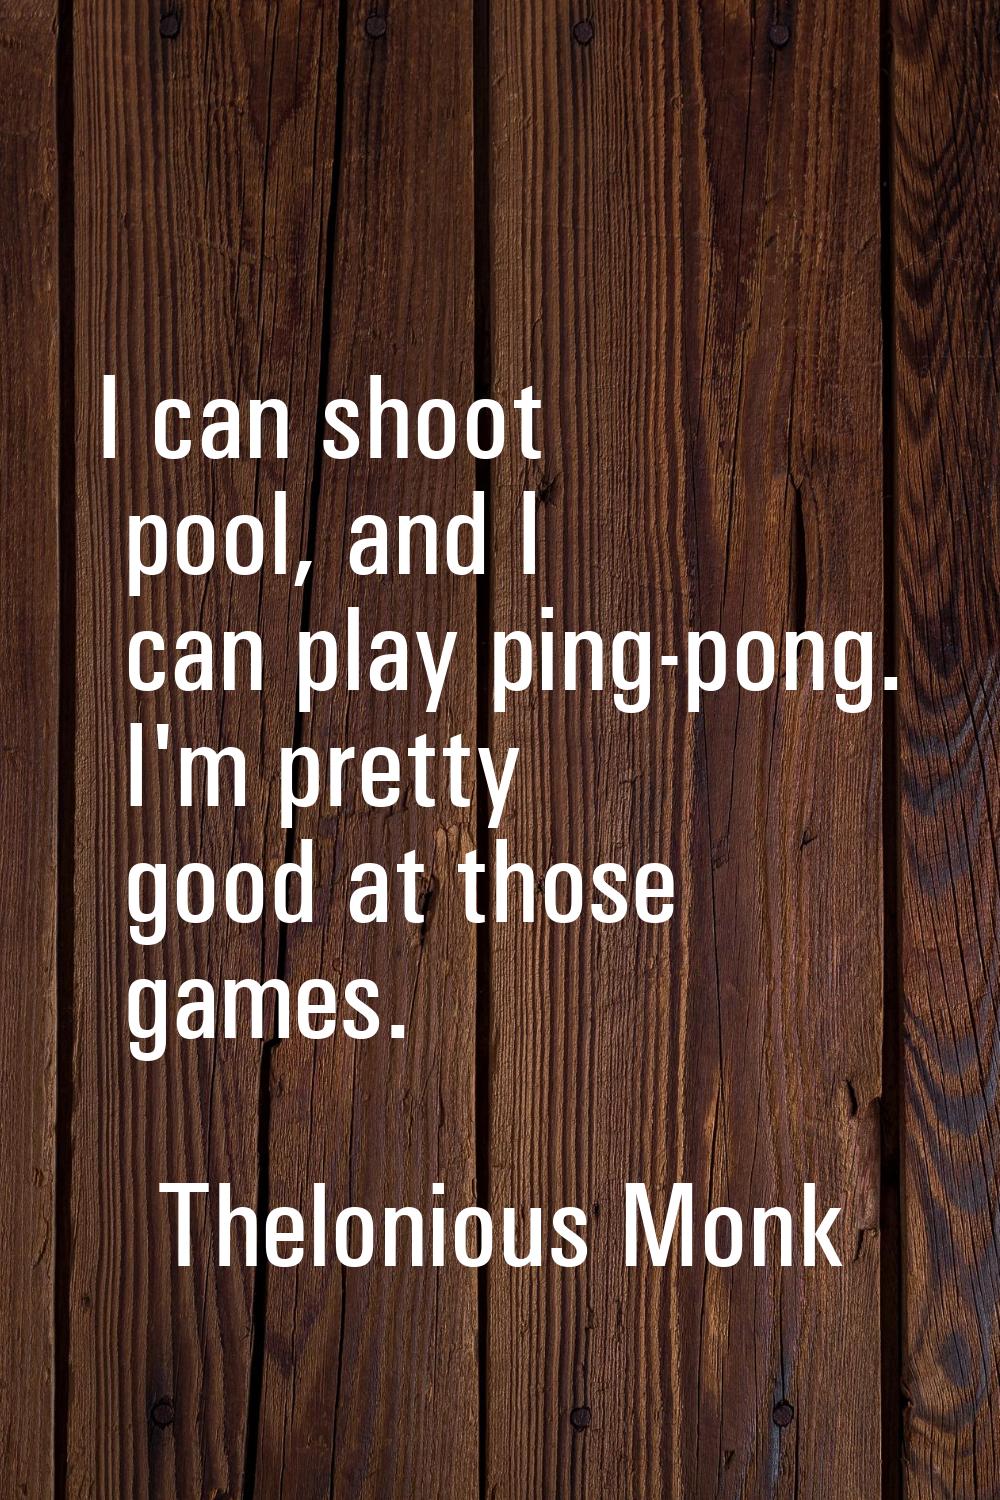 I can shoot pool, and I can play ping-pong. I'm pretty good at those games.